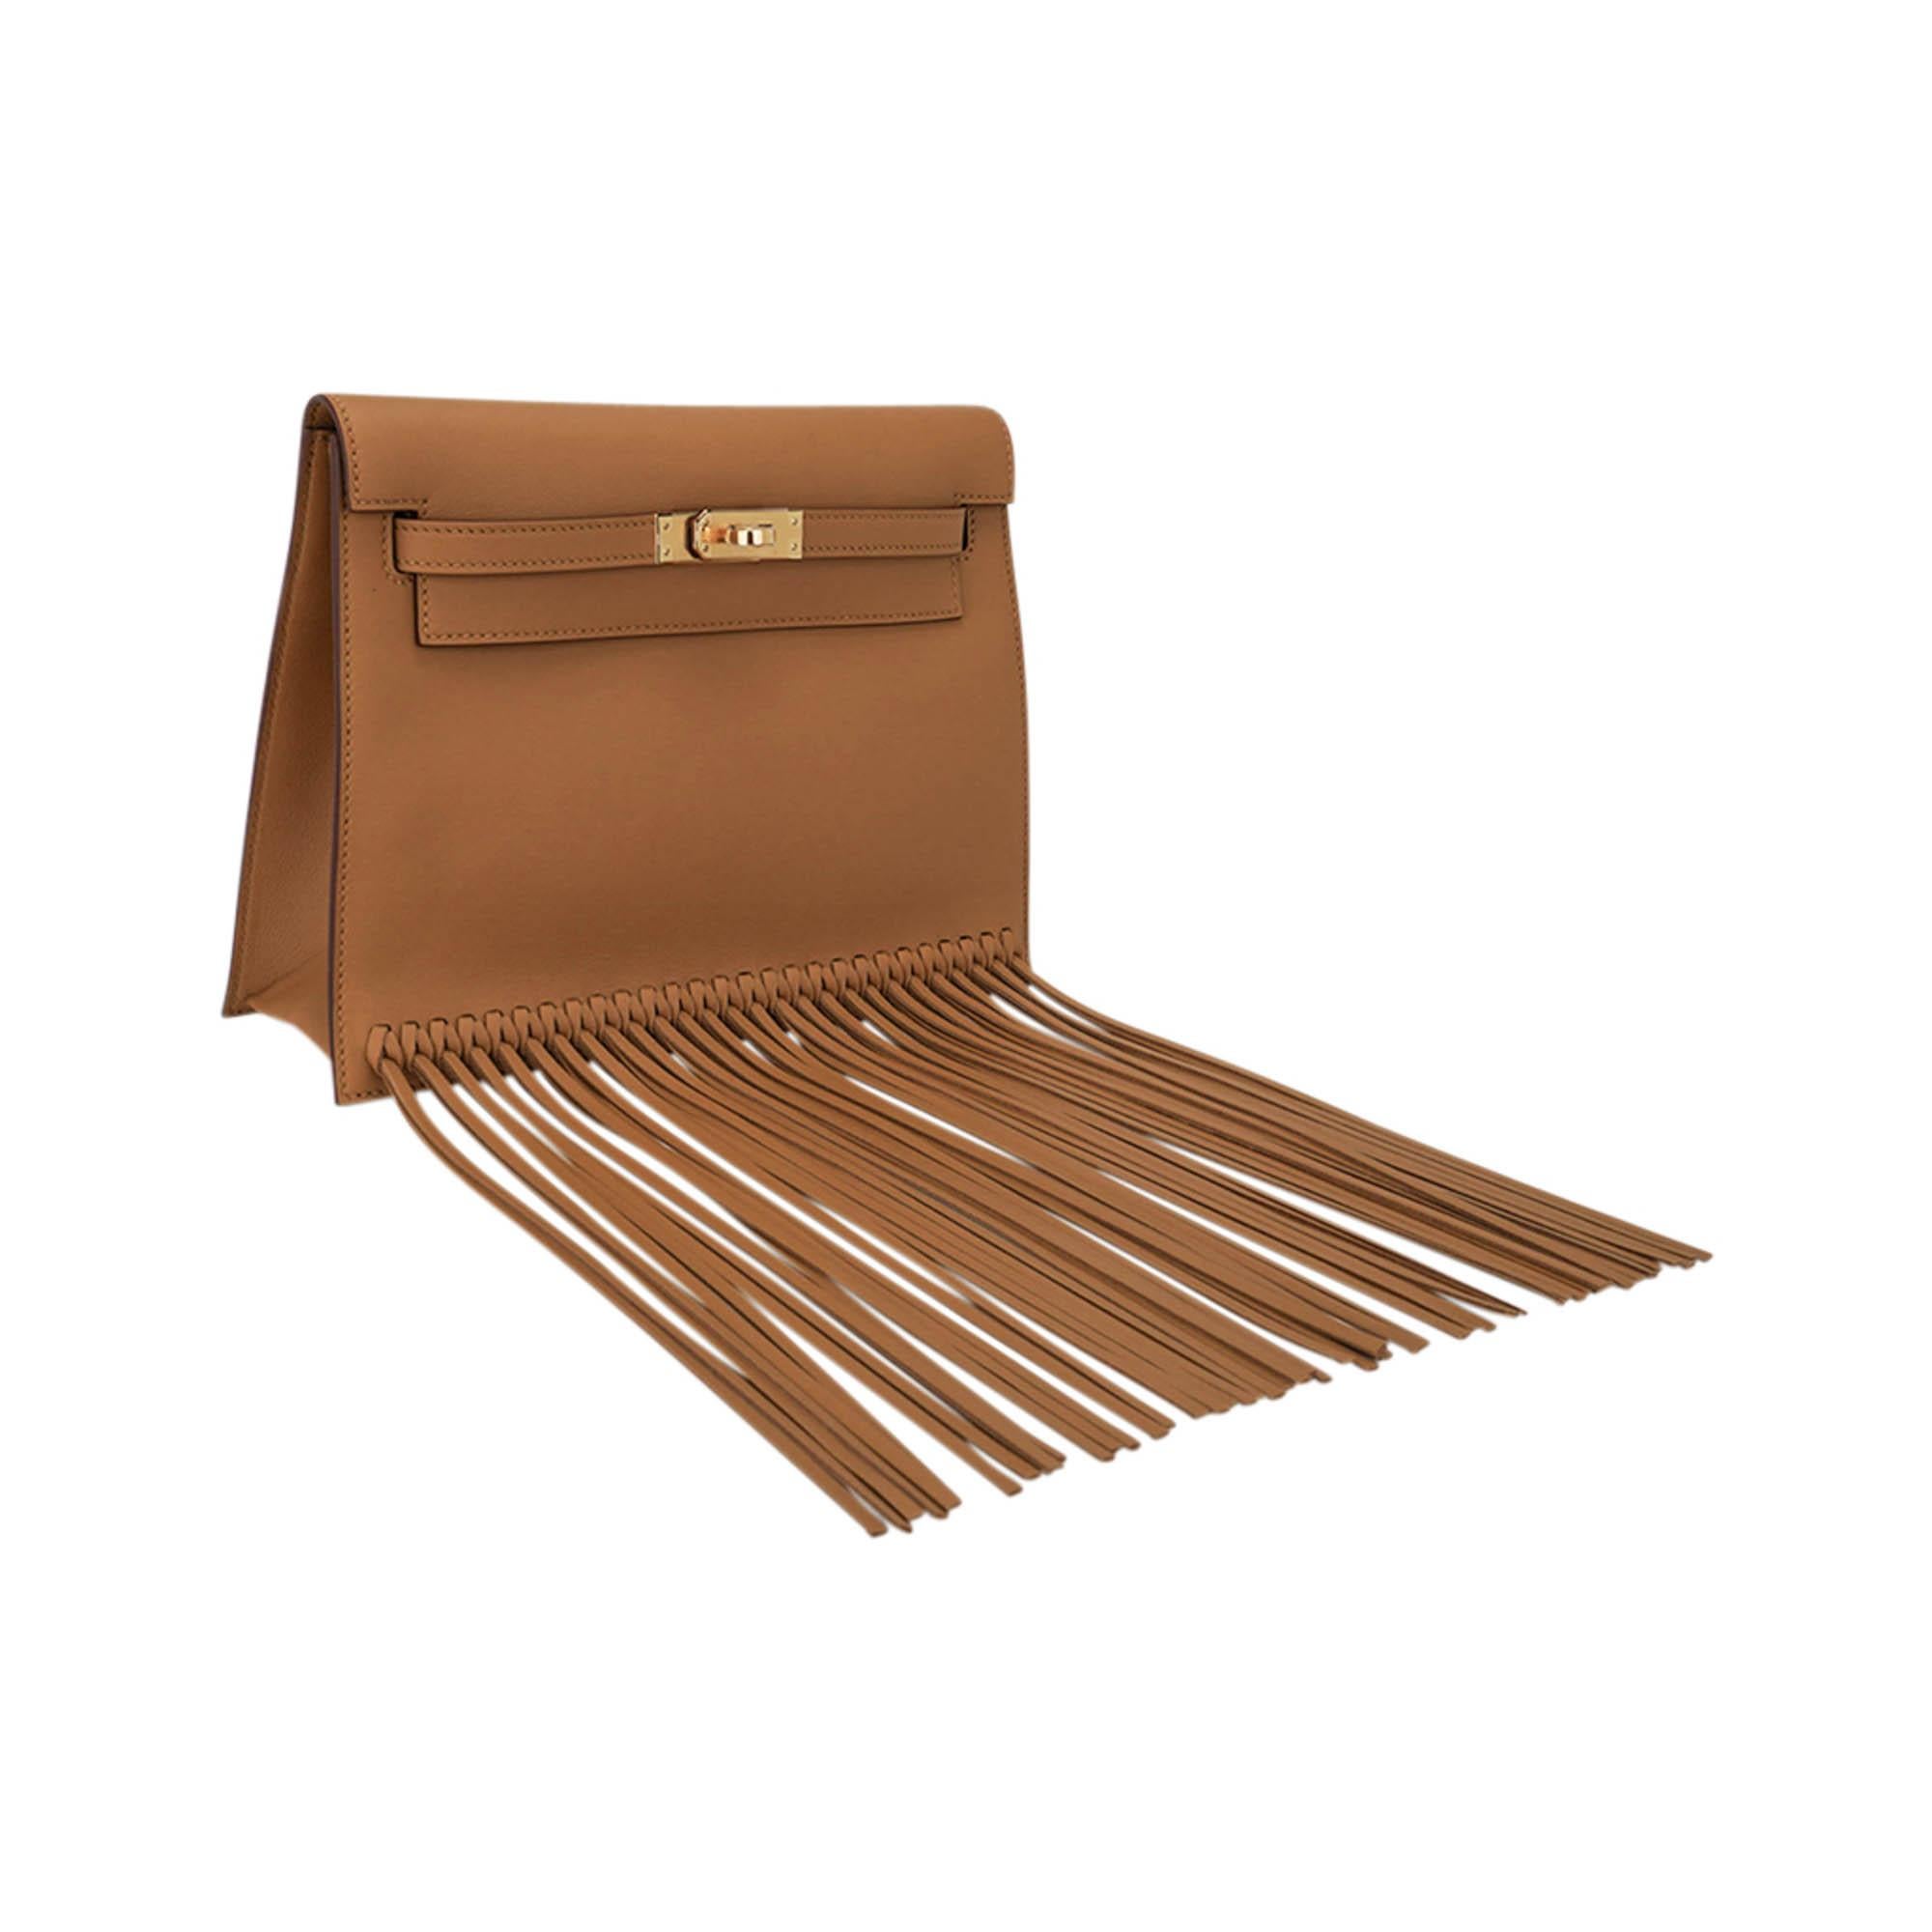 Mightychic offers a limited edition Hermes Kelly Danse Fringe bag featured in Sesame.
This fabulous, versatile bag can be worn as a backpack, shoulder, crossbody or waist bag.
Lush with Gold Hardware.
Comes with sleeper and signature Hermes box.
NEW